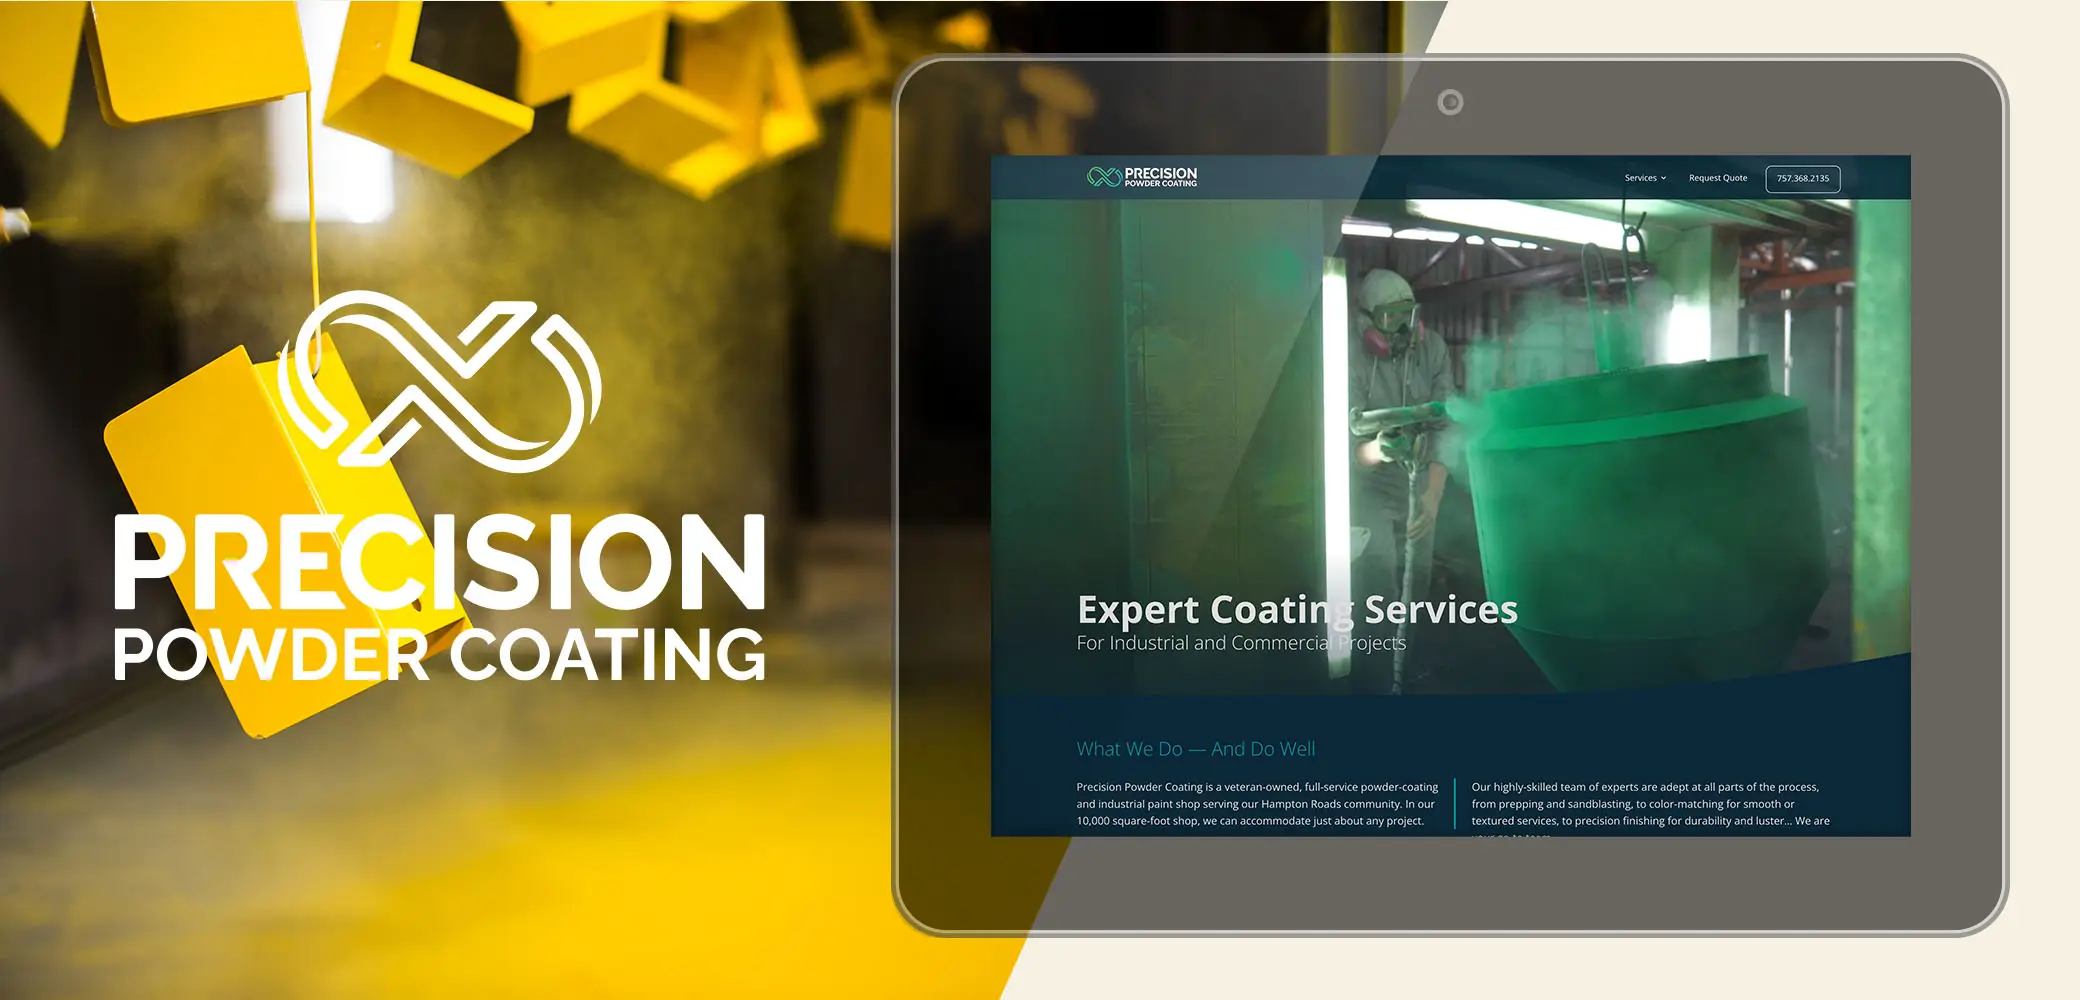 Precision Powder Coating website design and development by Red Chalk Studios, a full-service creative and marketing agency based in Virginia.